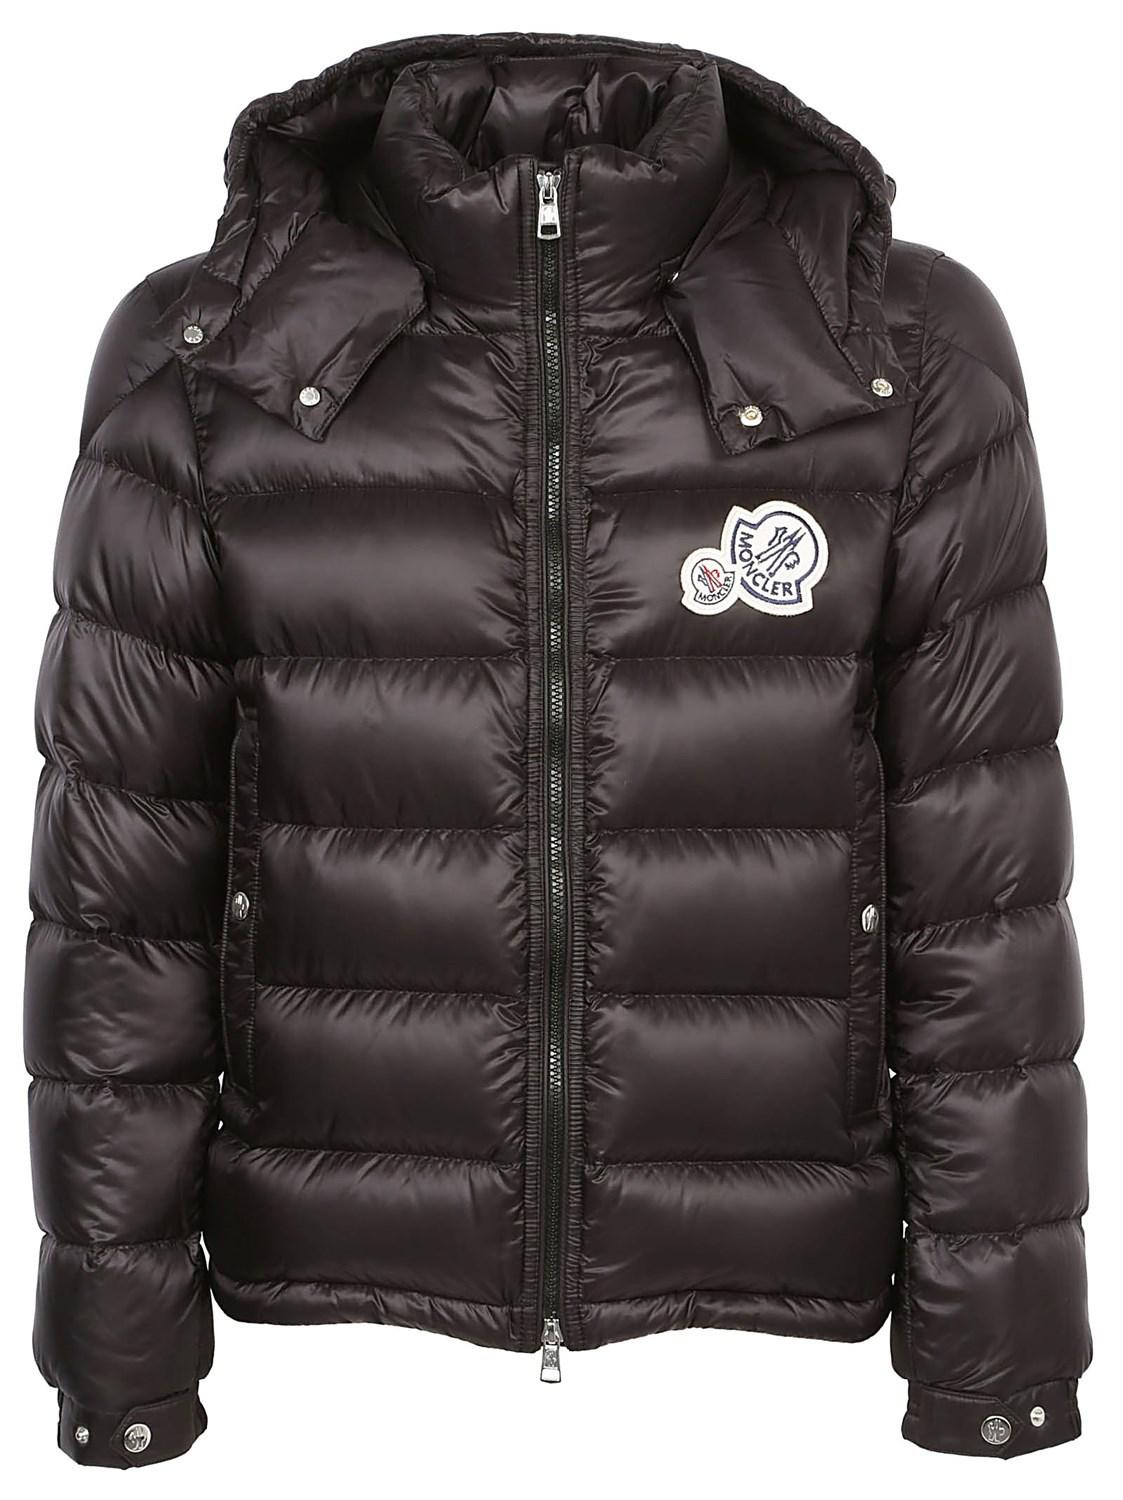 Moncler Synthetic Bramant Down Jacket in Black for Men - Lyst